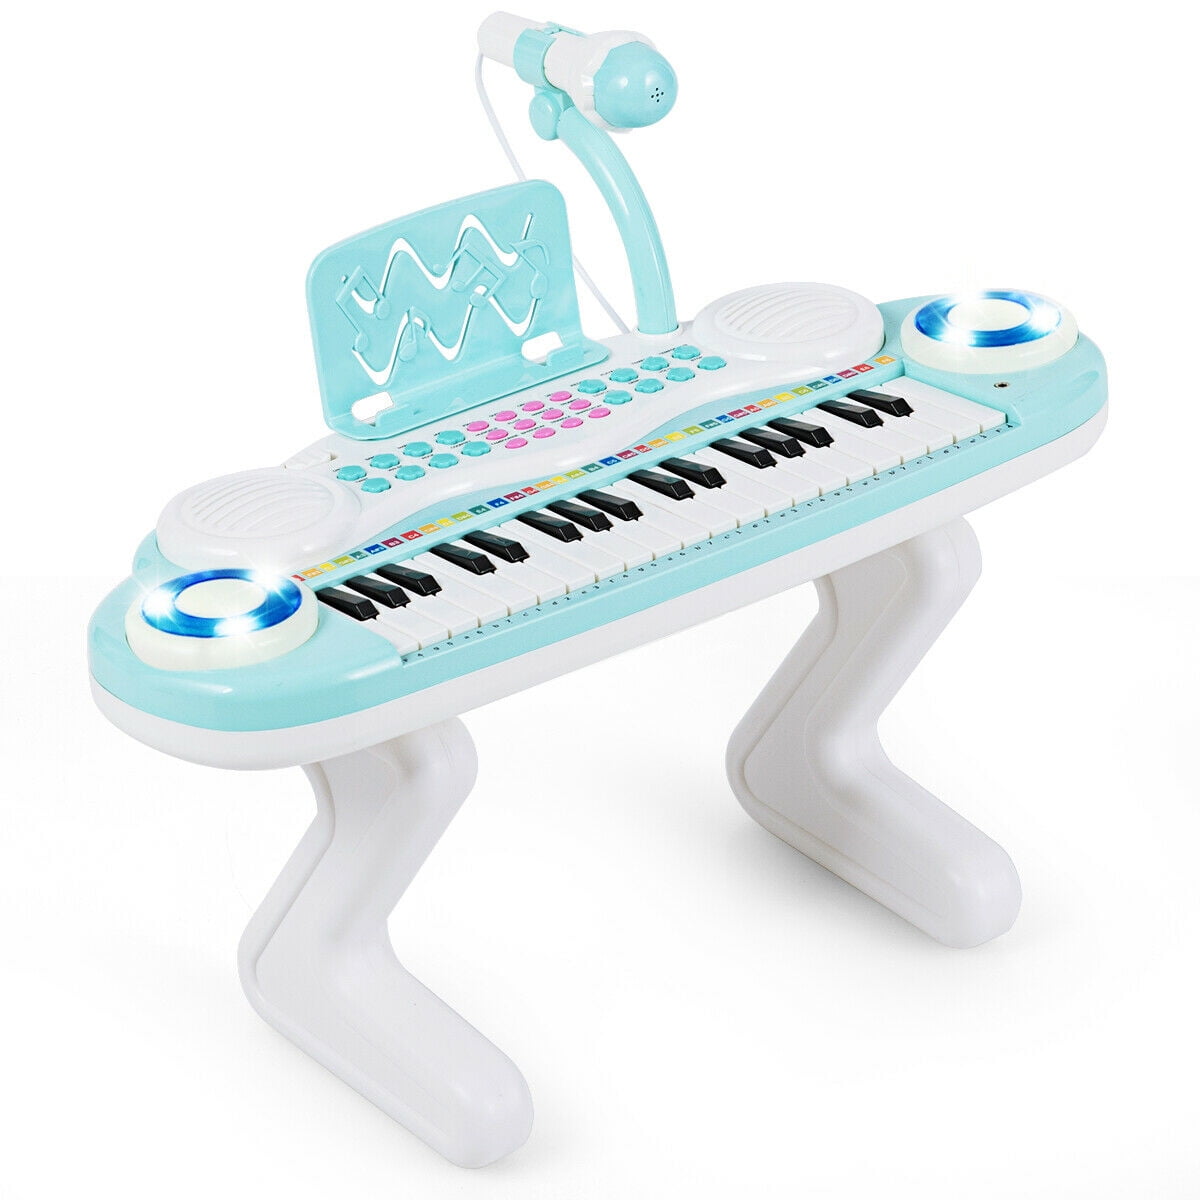 Blue Electronic Piano Toy for Kids & Toddler Microphone Record & Playback Custom O.B Toys&Gift Musical Instrument Piano Toy 37-Key Kids Electronic Keyboard Organ w/ Stool 